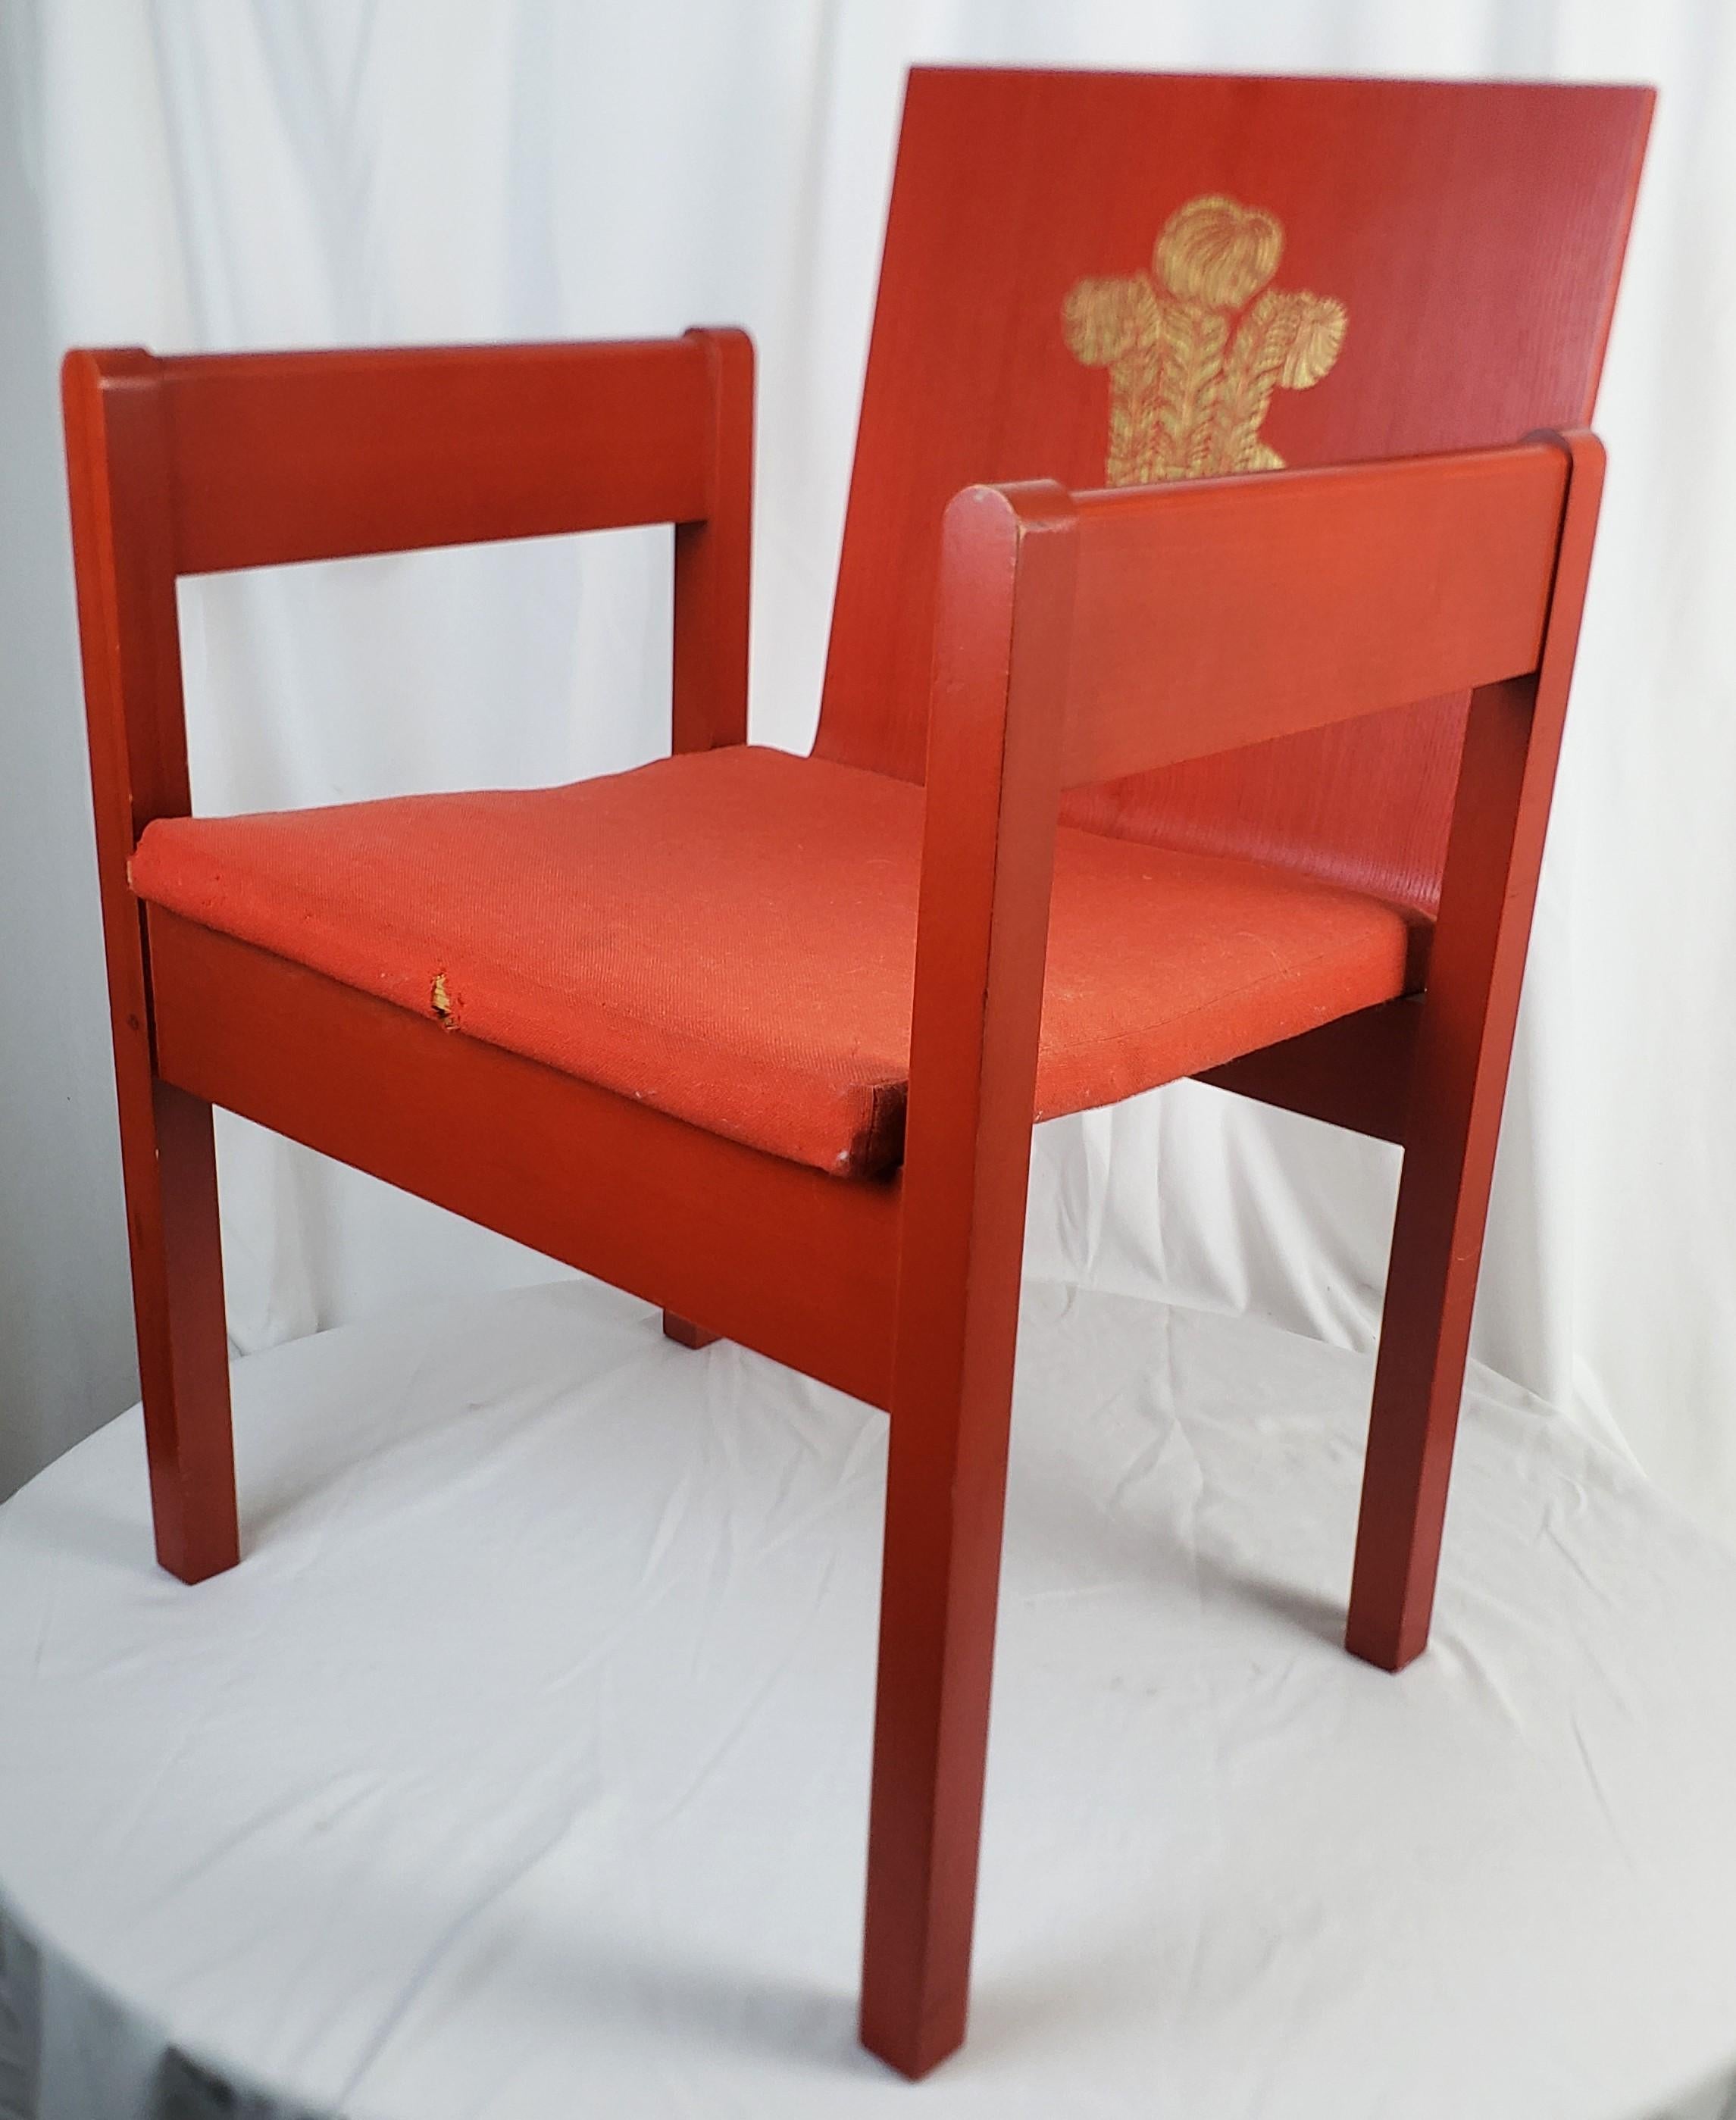 prince charles investiture chair